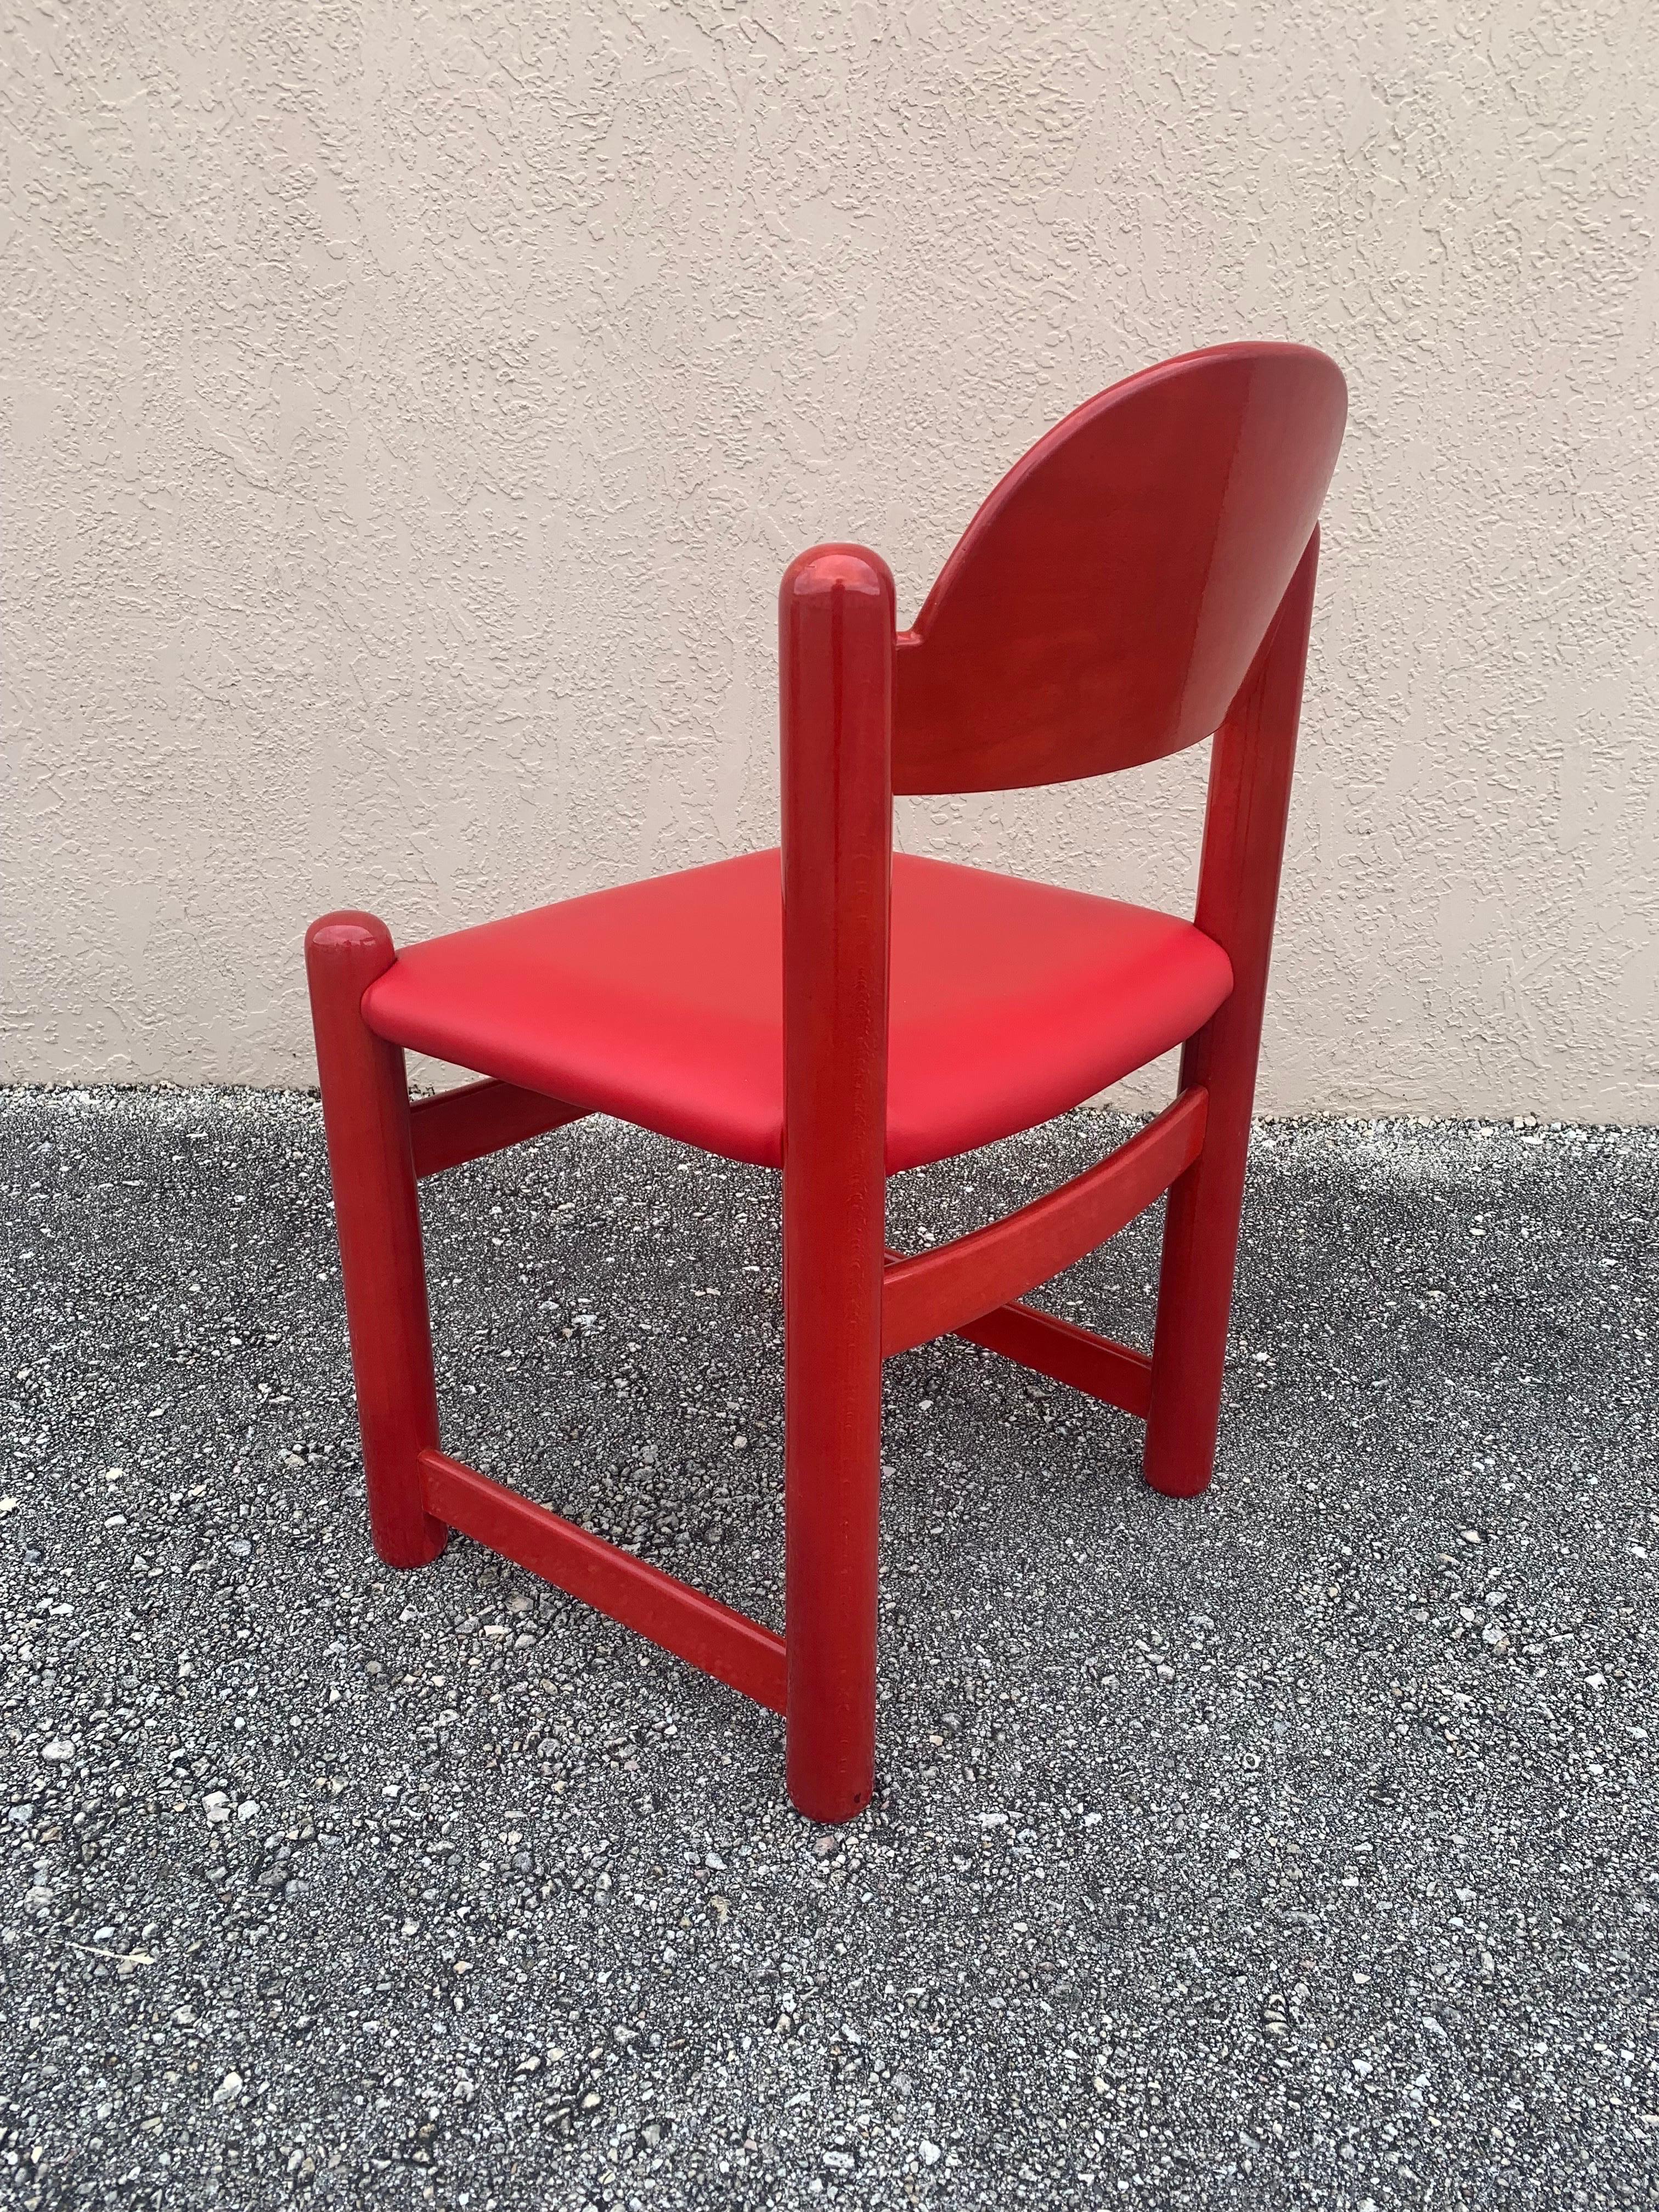 Post-Modern Hank Loewenstein Oak and Leather Chairs in Red, 1970s For Sale